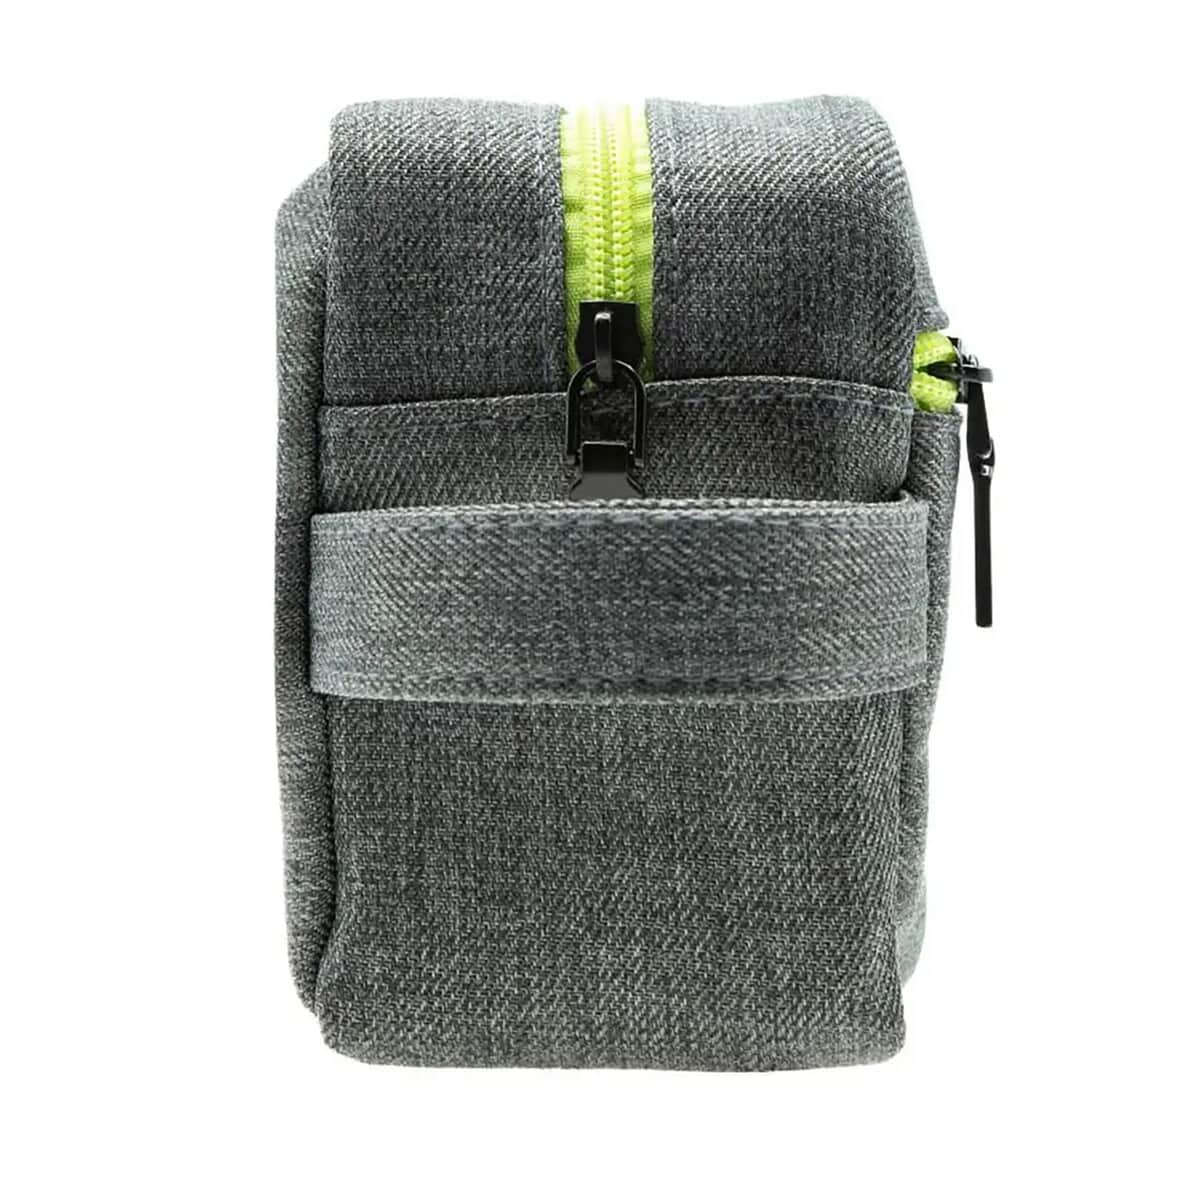 Gray Canvas Textured Dopp Kit With Lime Green Zipper, Men's Dopp Kit Bag, Best Dopp Kit, Travel Organizer for Accessories and Toiletries, Men's Toiletry Bag image number 4